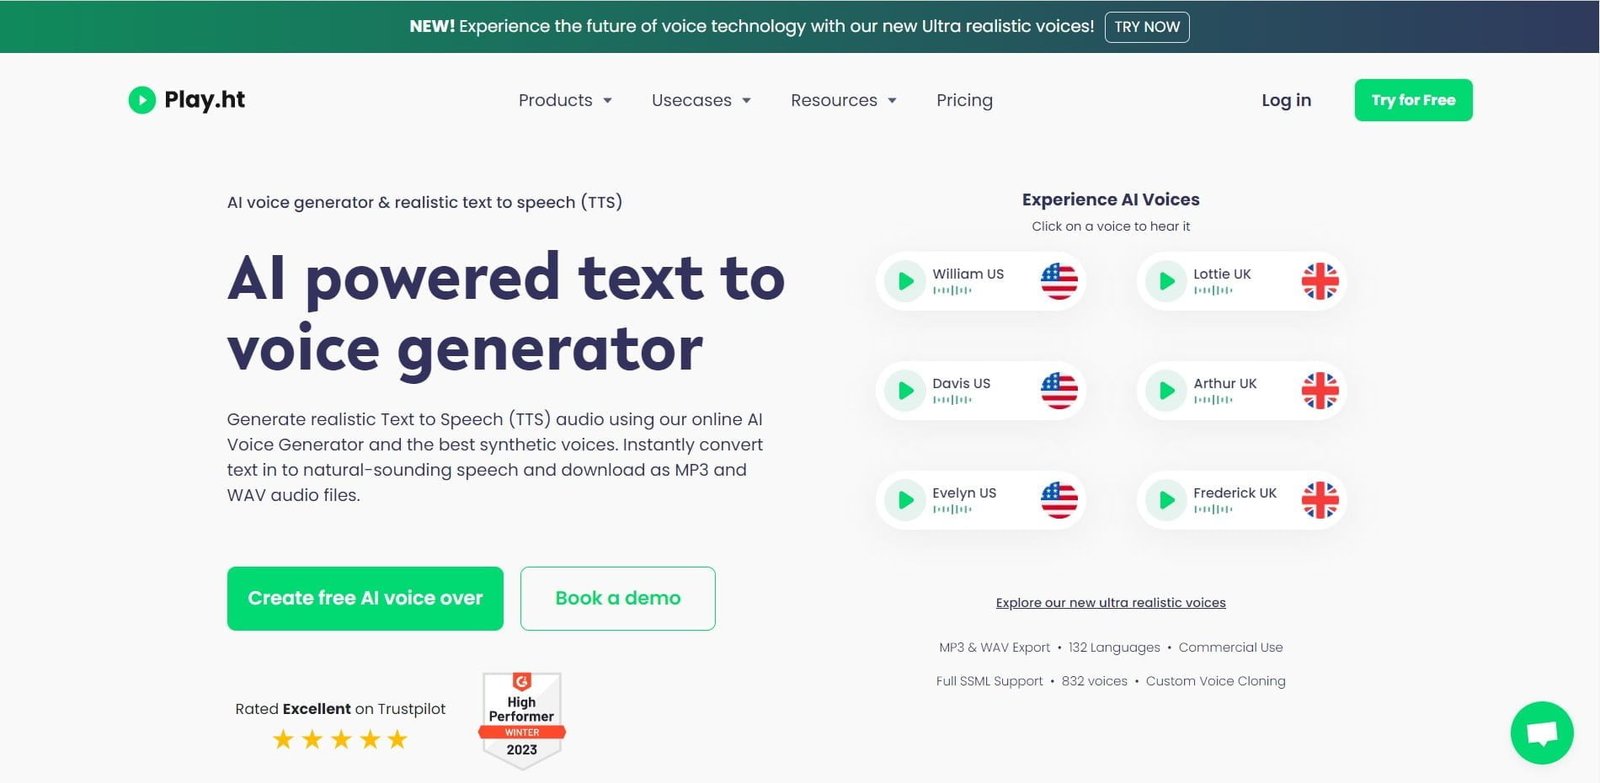 Play.ht is an AI voice generator and realistic text-to-speech (TTS) platform that instantly converts your text into natural-sounding speech.